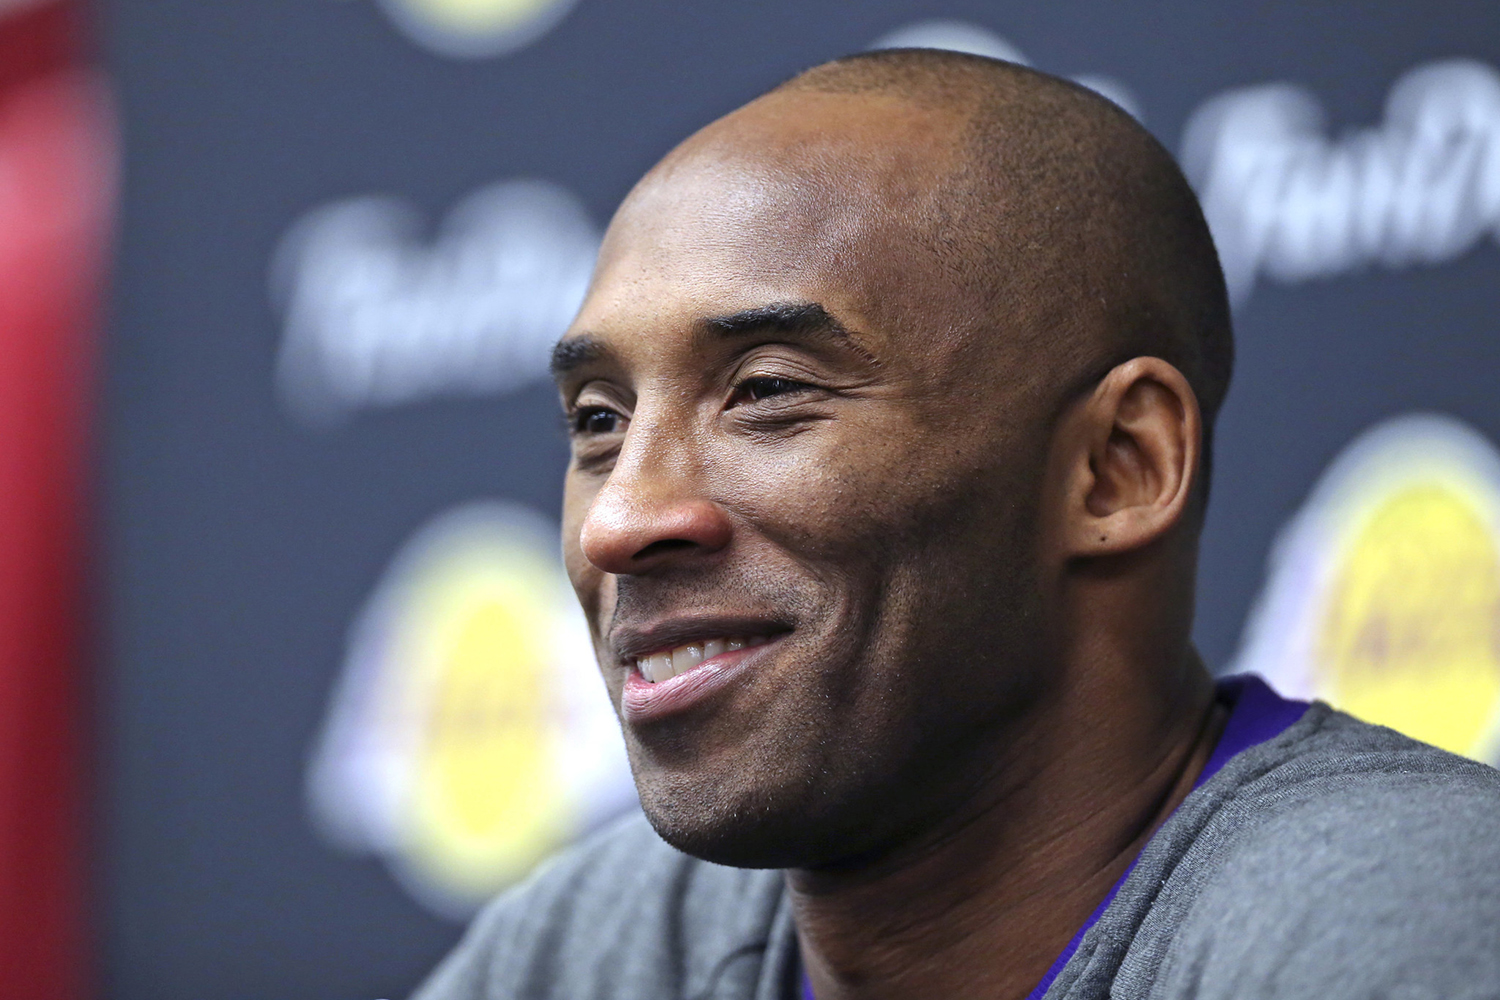 OPINION: Transcendent athletes like Kobe are the superheroes of our time -  The Student Life